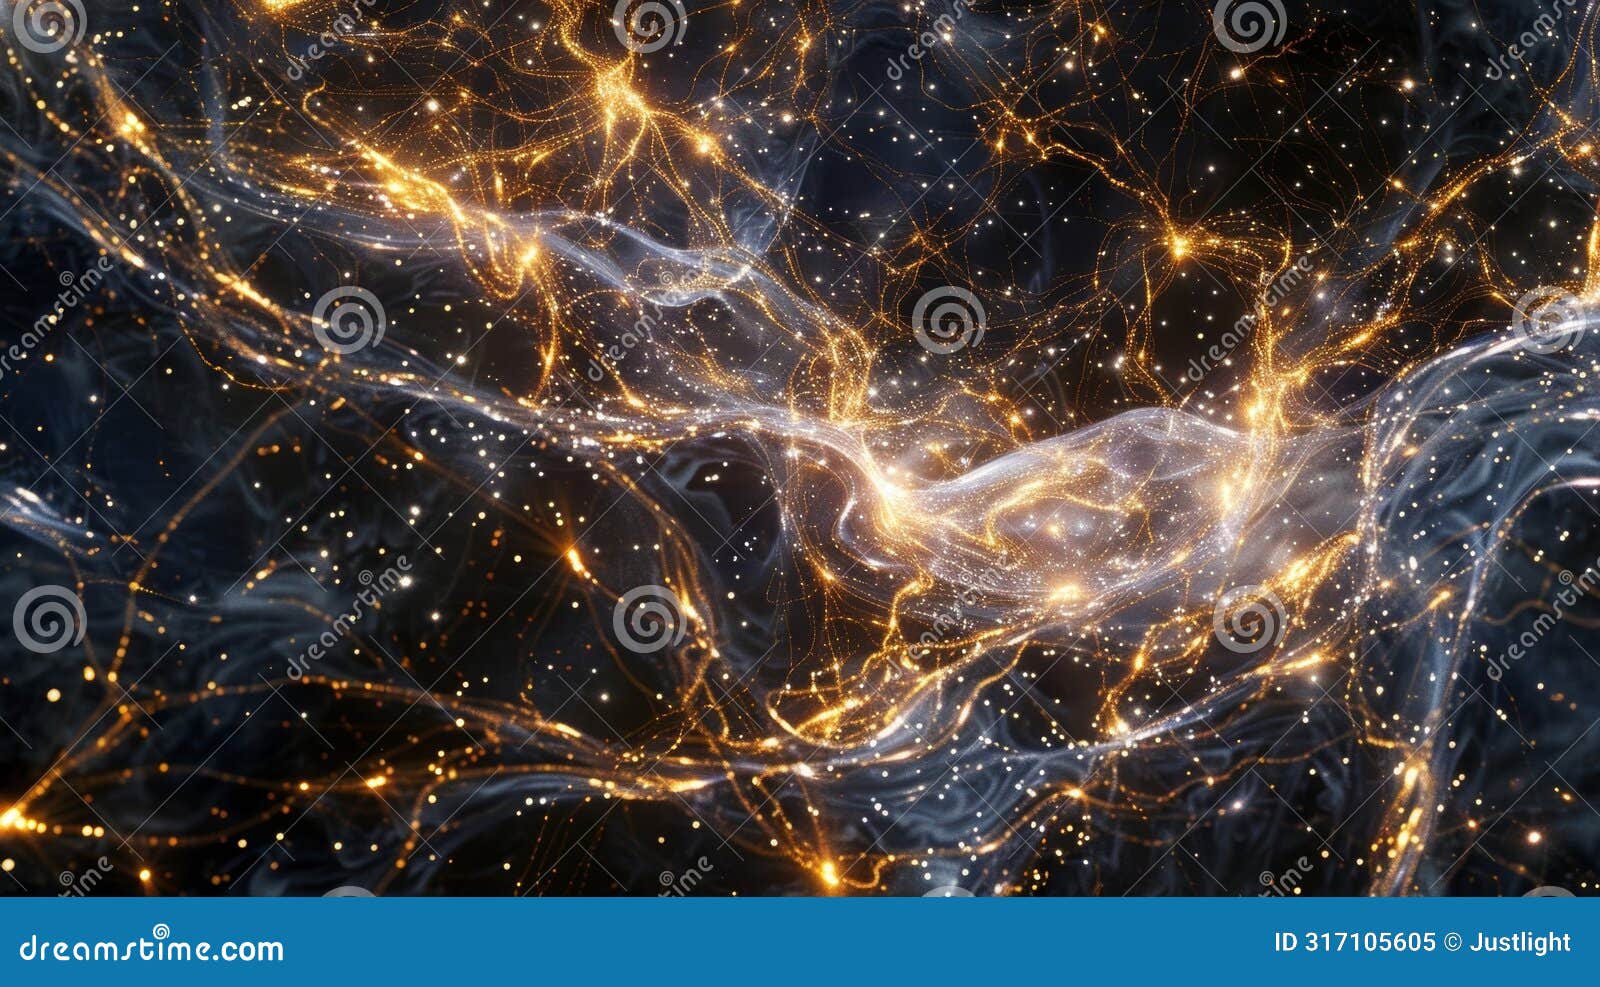 spanning billions of light years the intricate web of dark matter serves as the framework for the universe